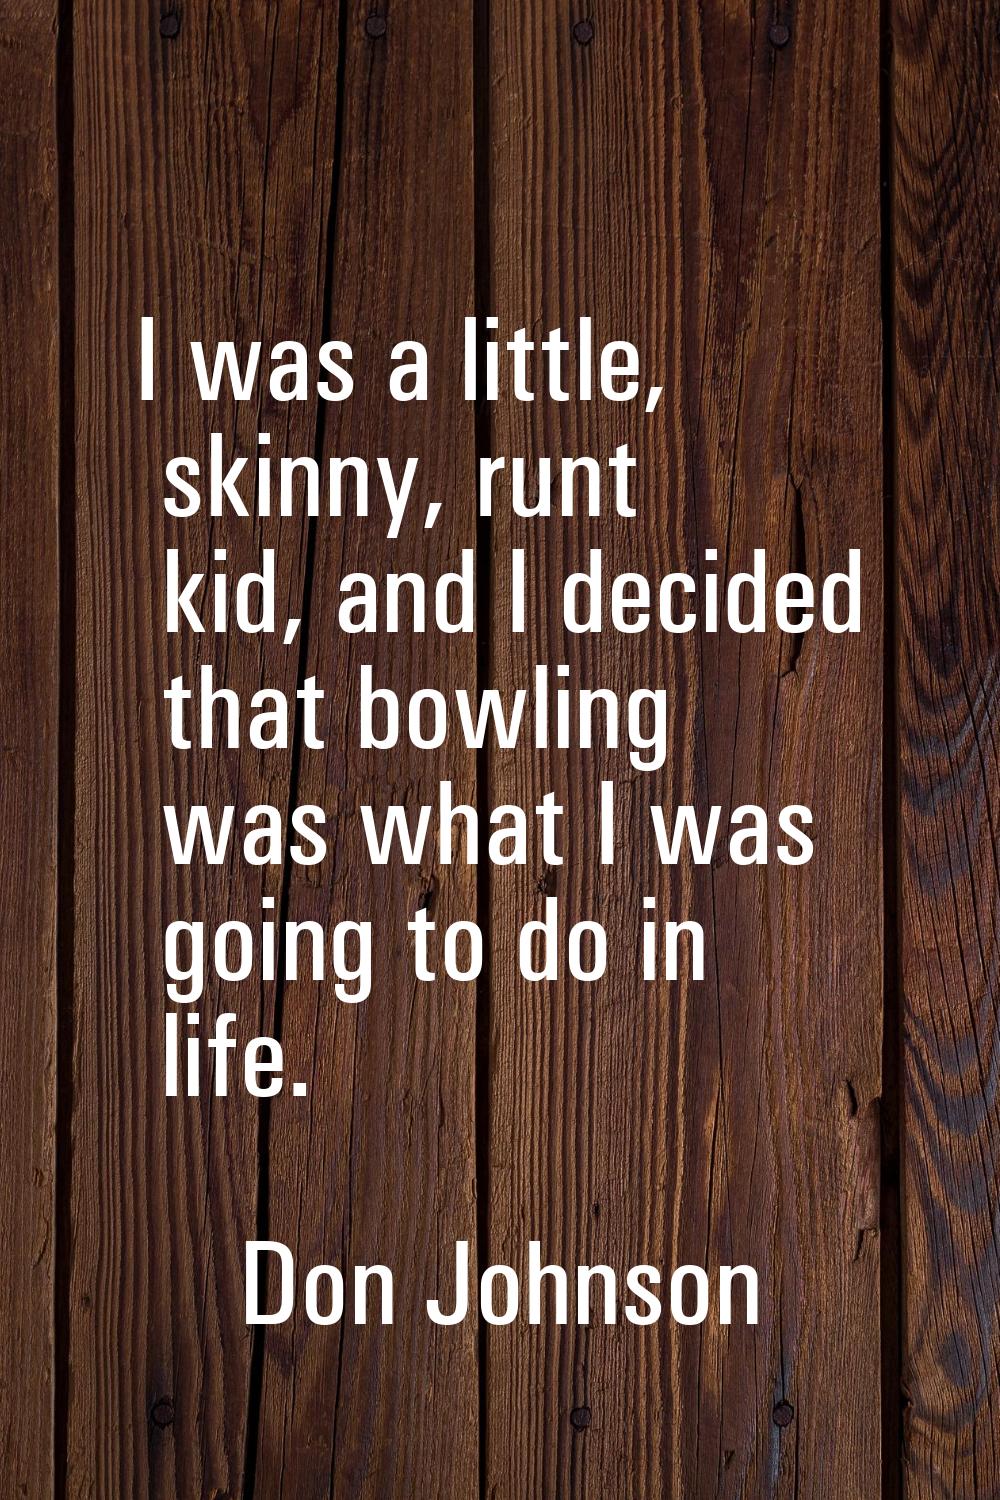 I was a little, skinny, runt kid, and I decided that bowling was what I was going to do in life.